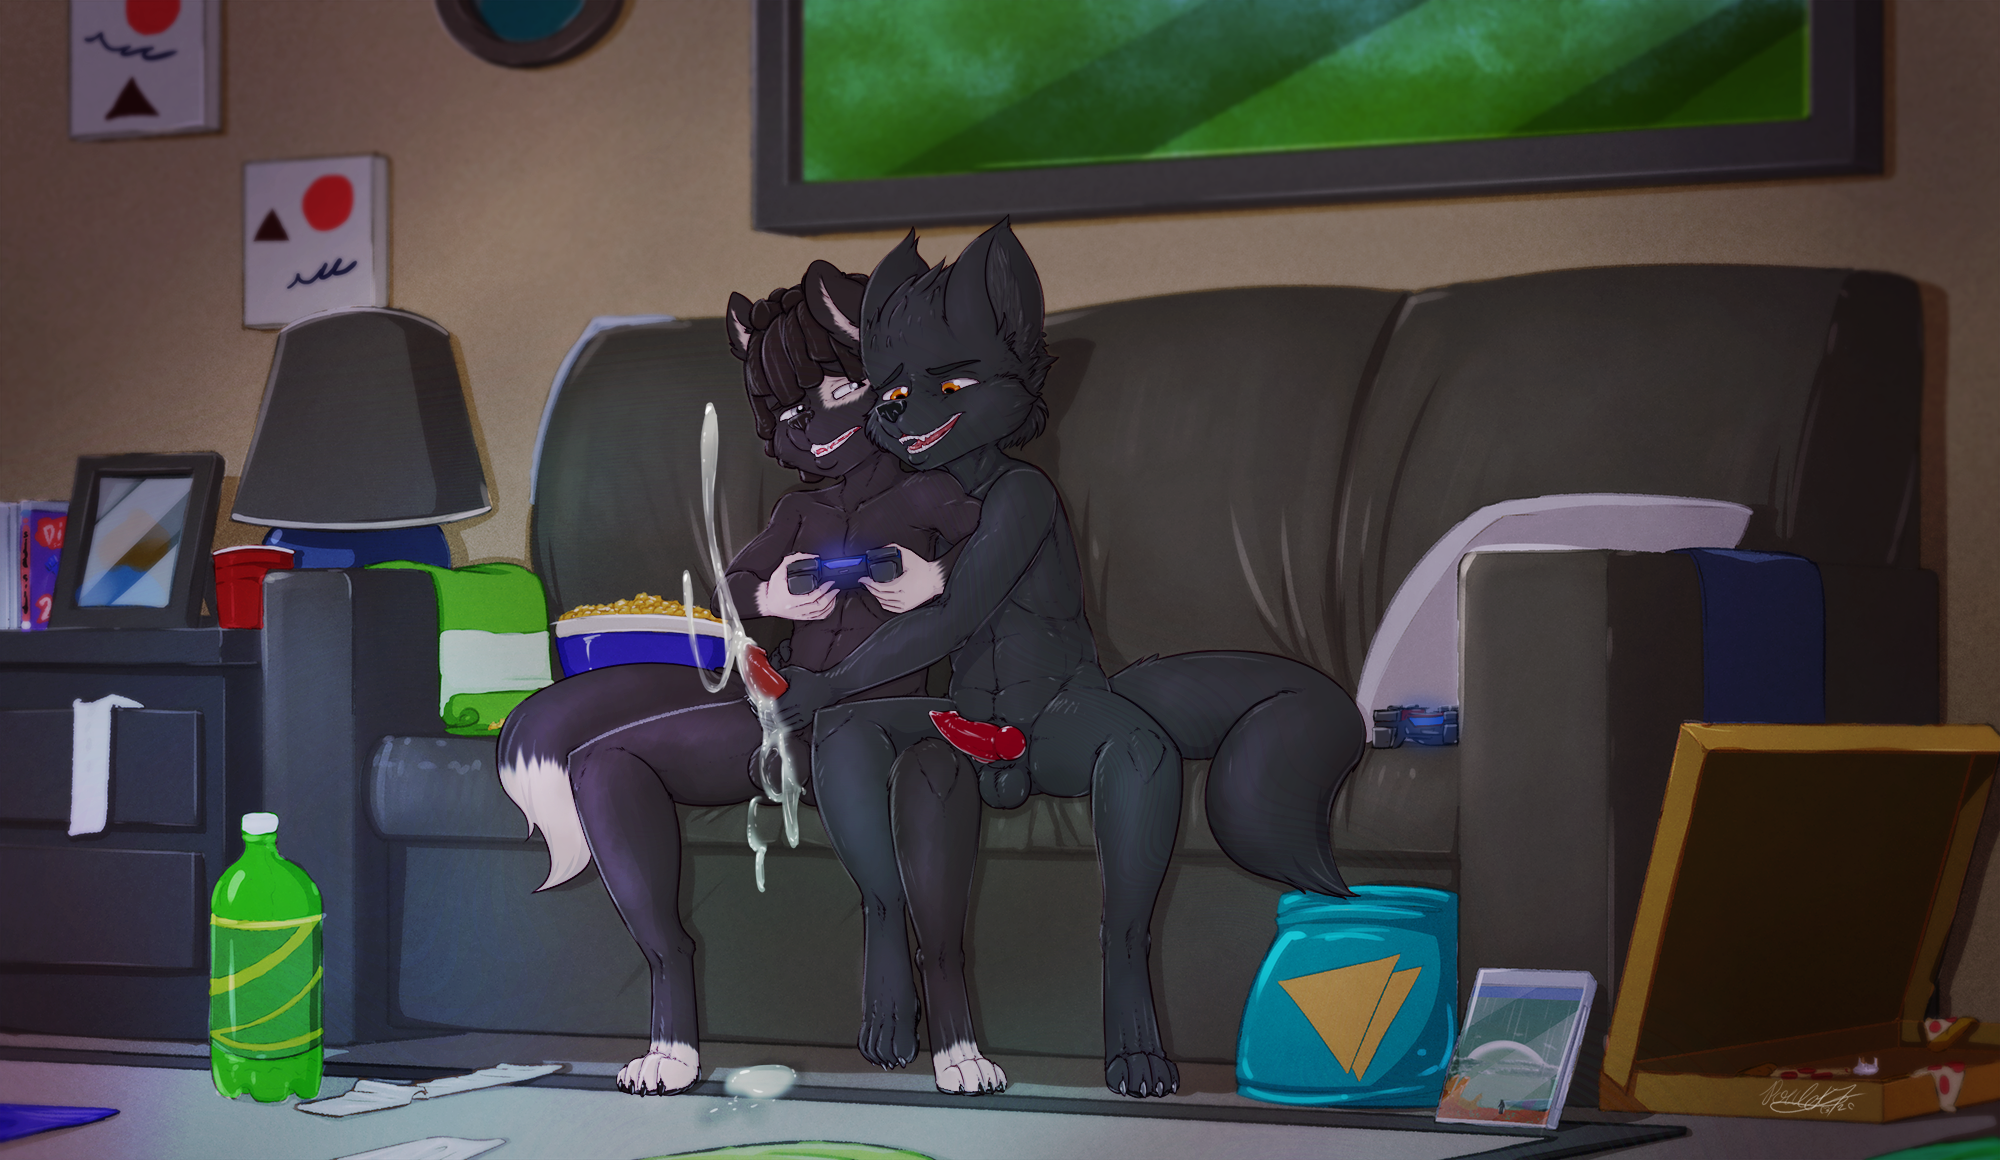 3043996_DiegoandFriends_lielong_couch_commission_02_sd